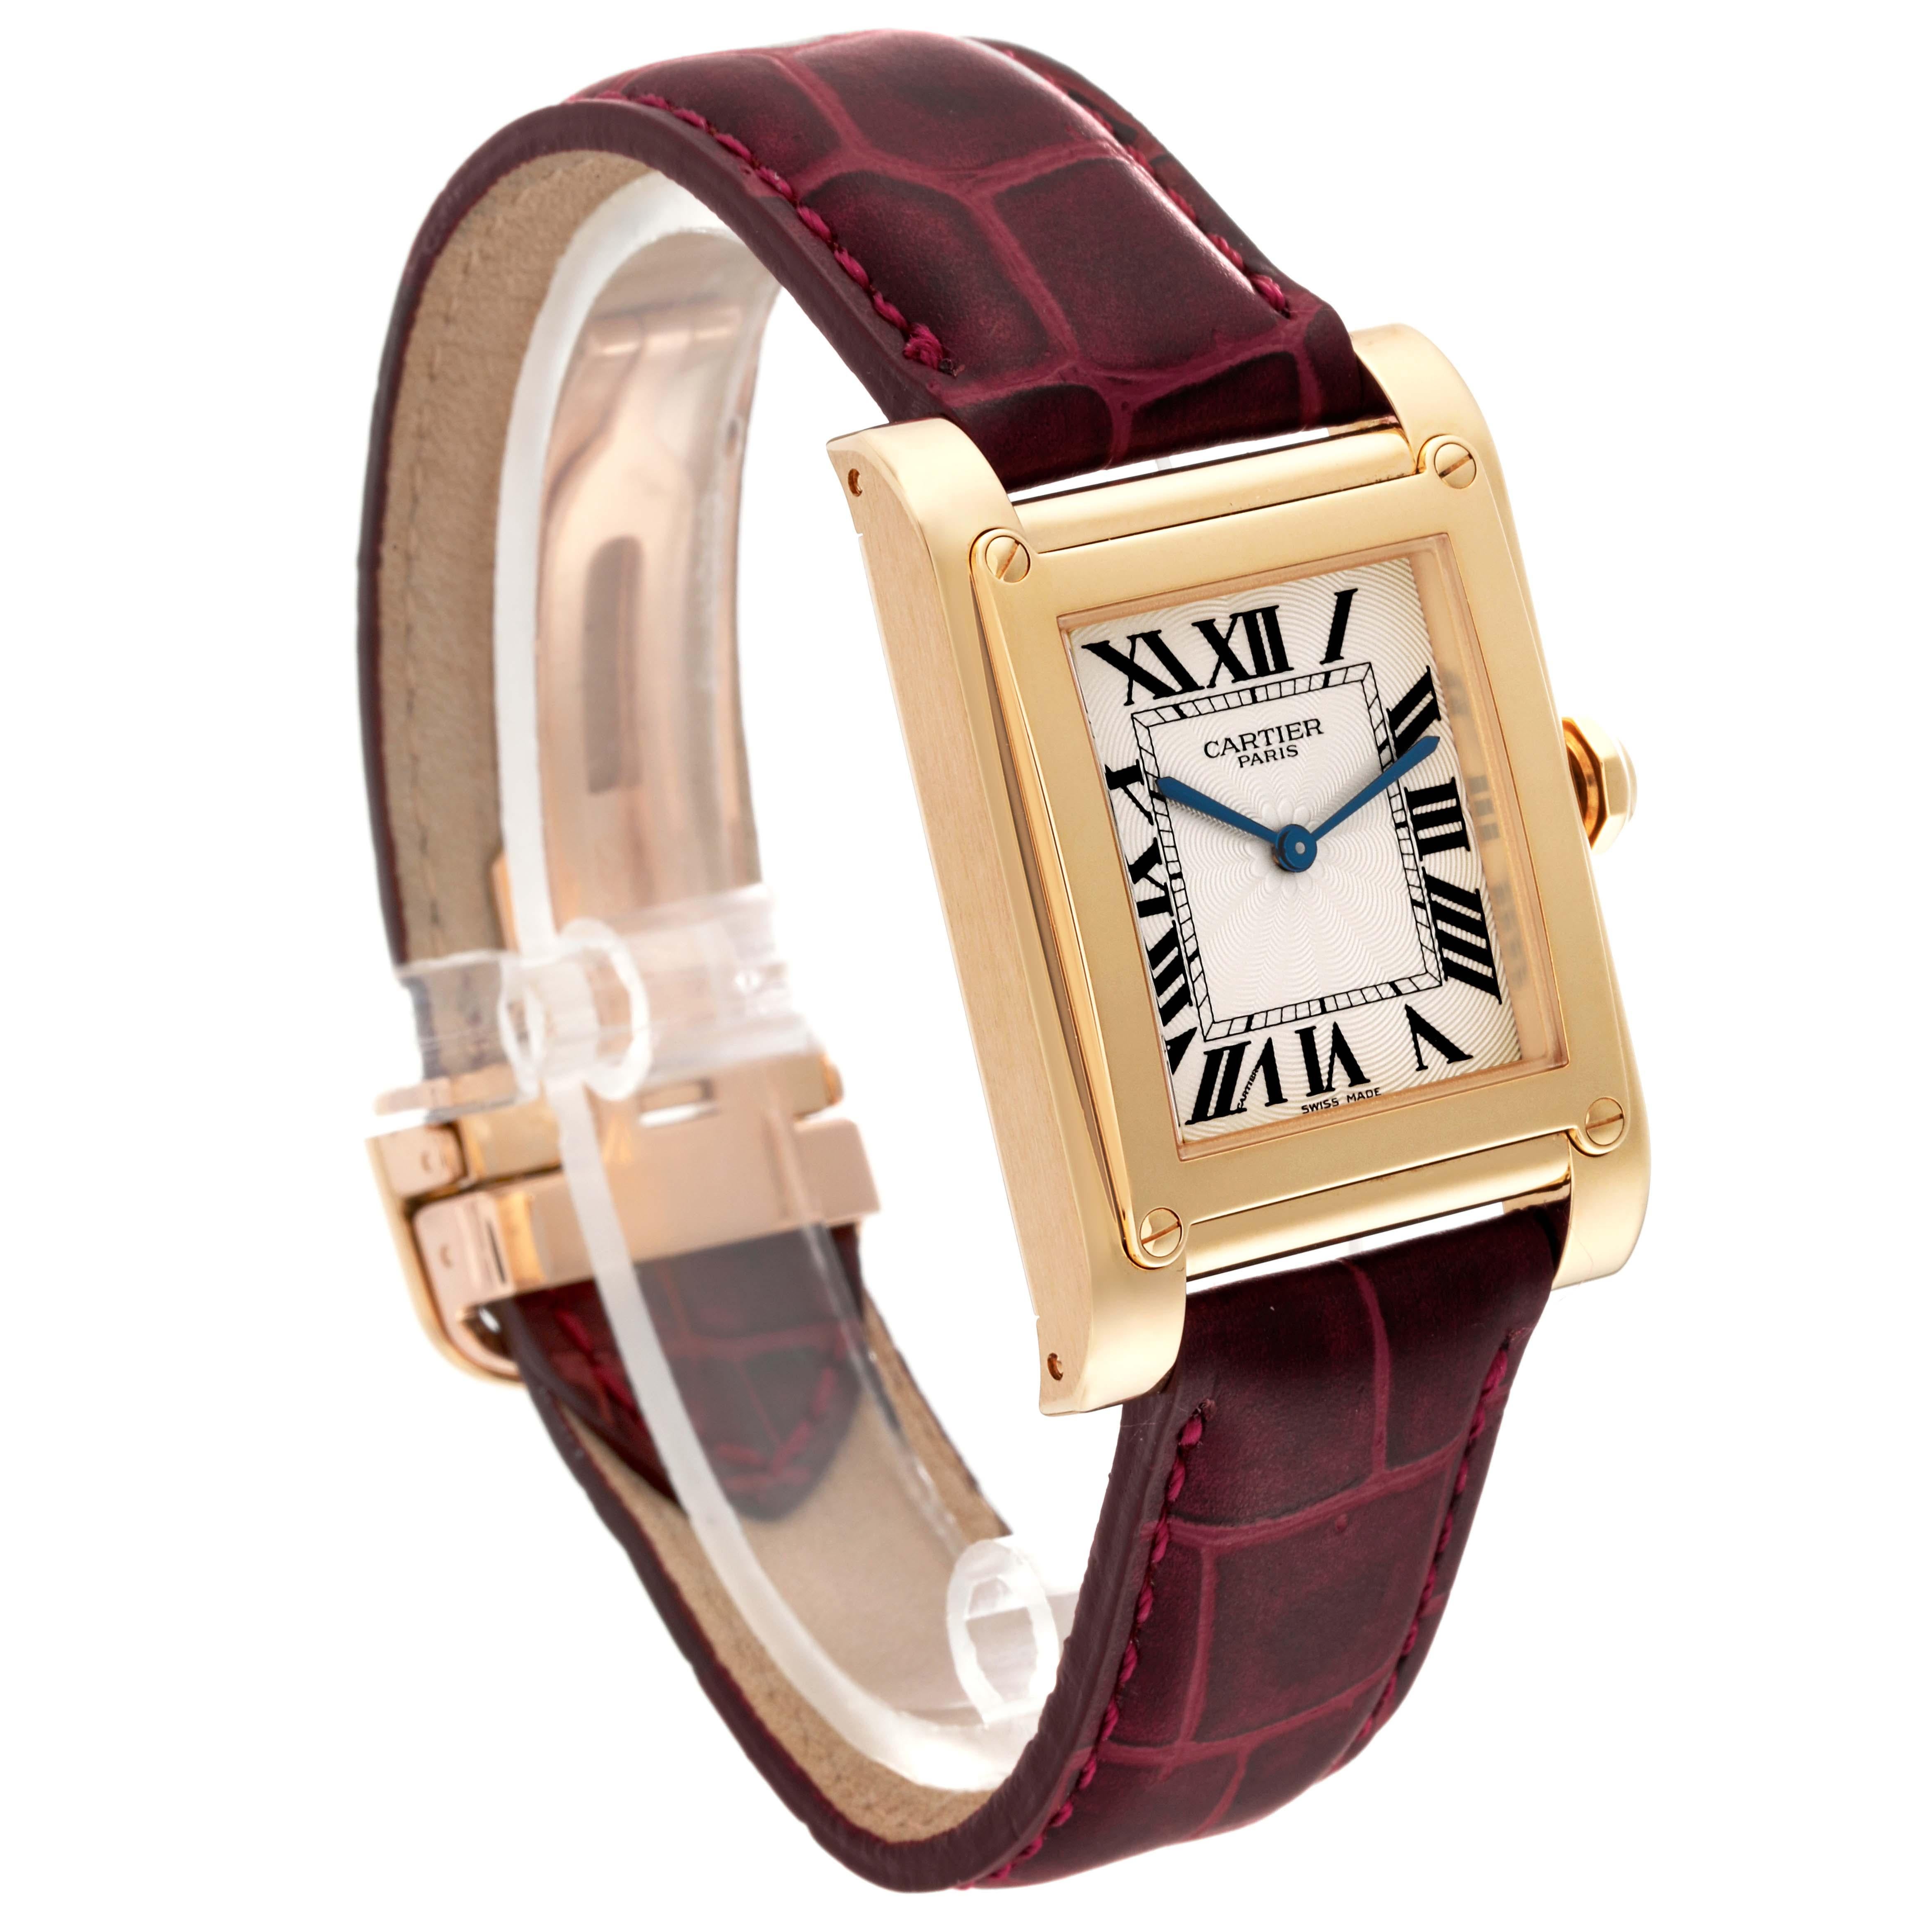 Cartier Tank a Vis Privee CPCP Collection Yellow Gold Mens Watch W1529451 For Sale 4